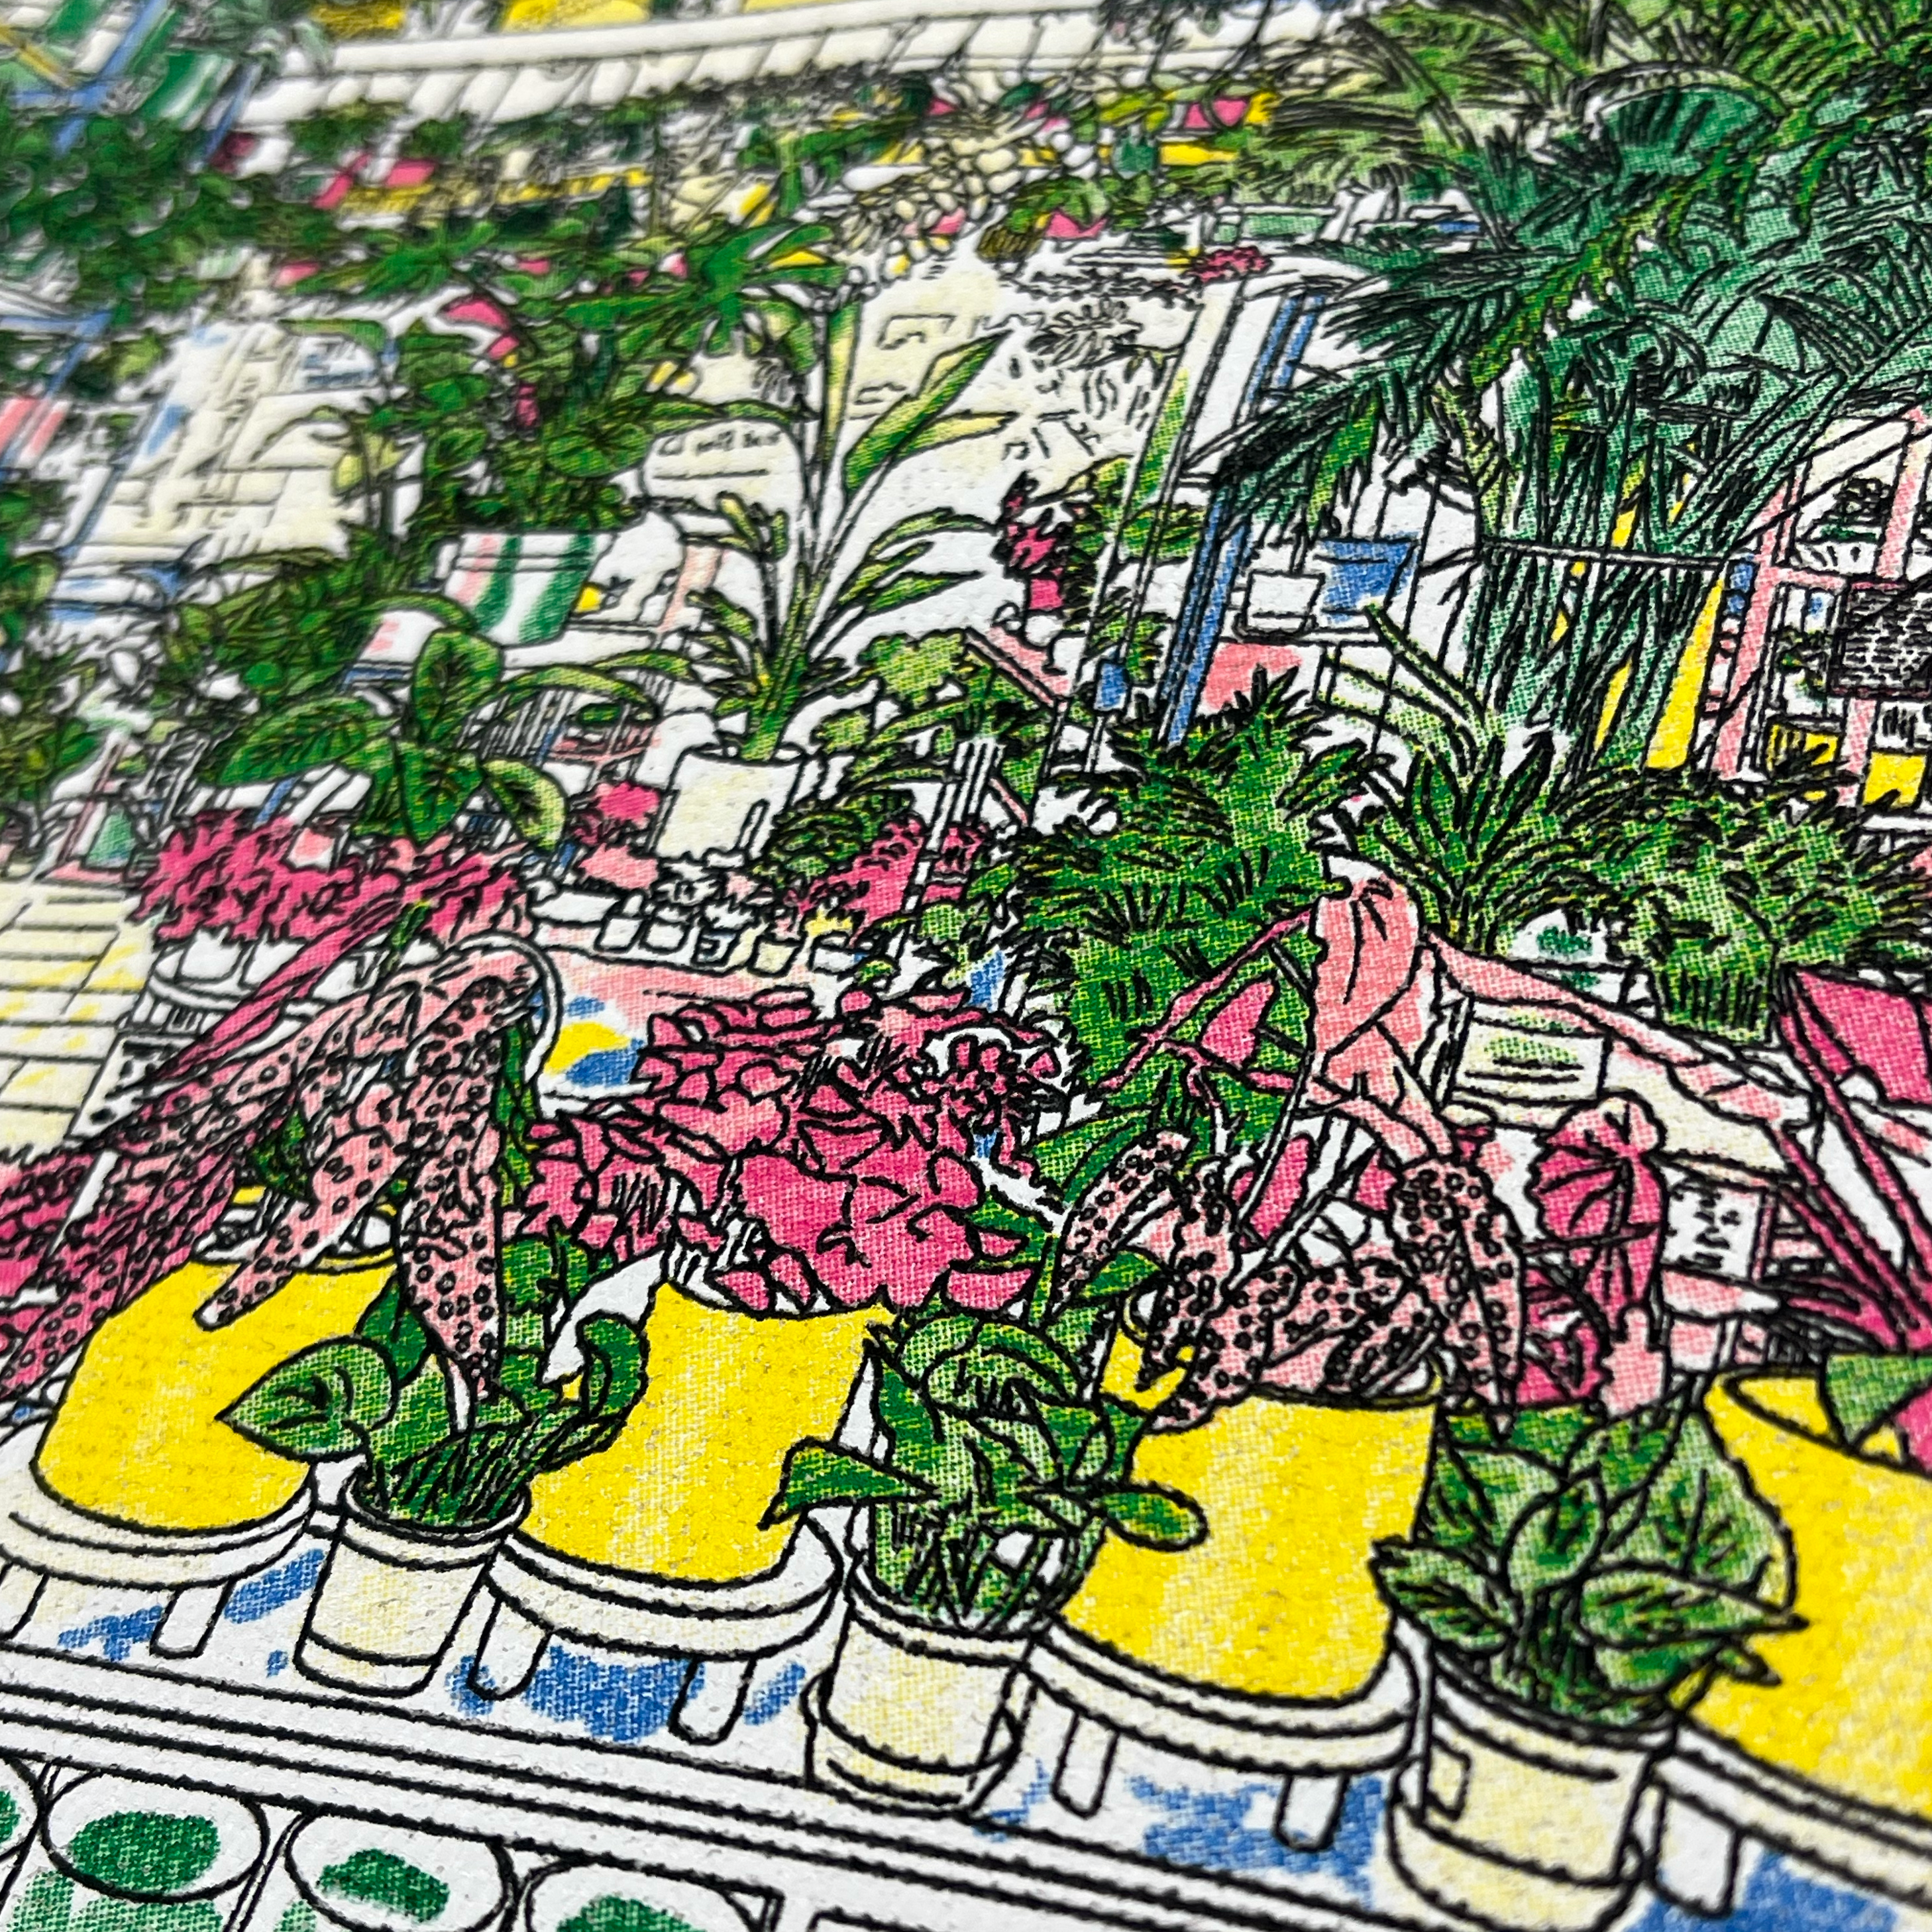 Close-up of large hand-drawn full color graphic of the inside of Planterday, a mission-driven plant shop in Oakland, CA, on a natural cotton shopping tote.